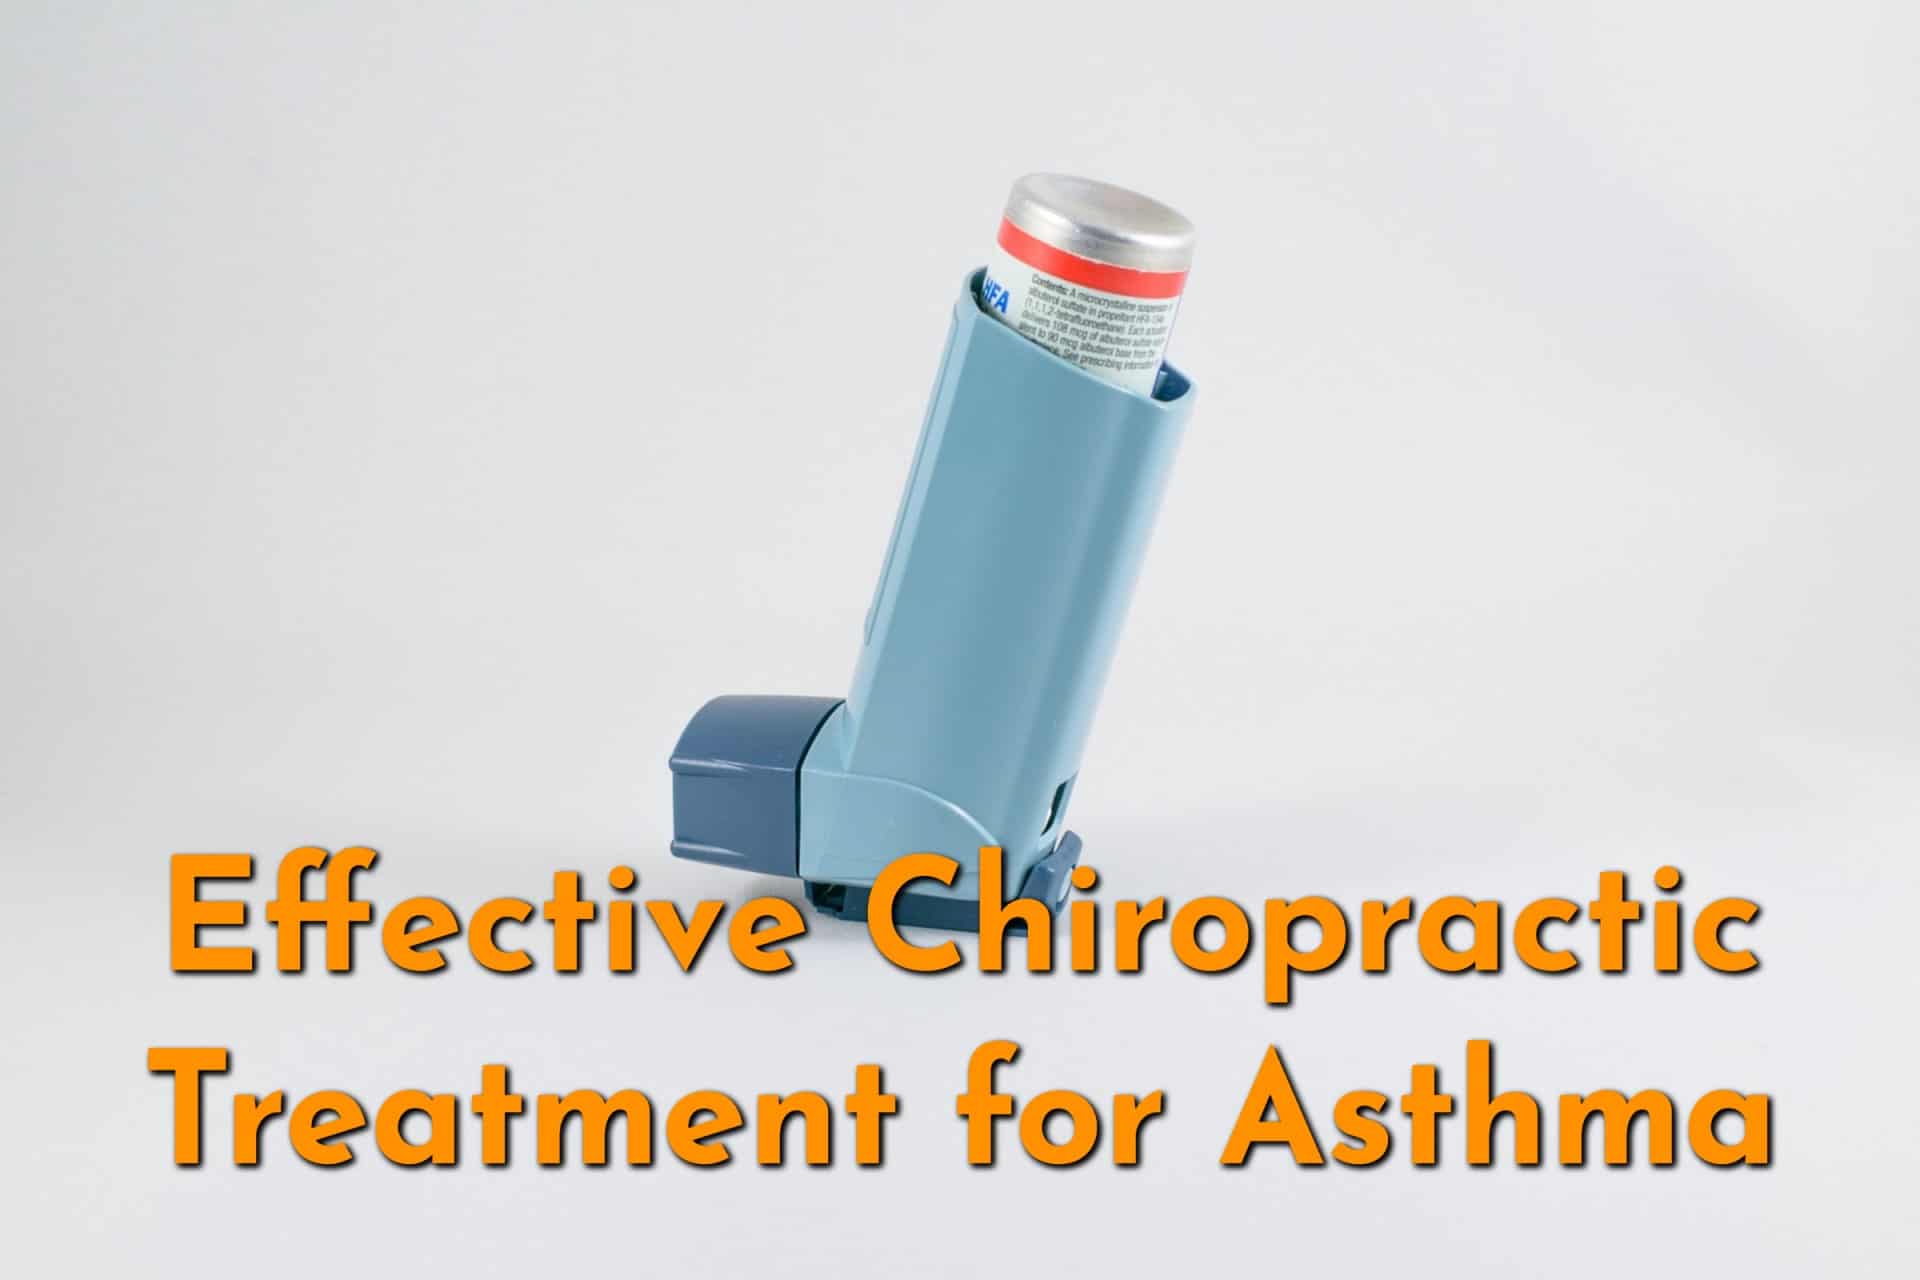 Does Chiropractic Treatment for Asthma Work? Breathe Better with Chiro